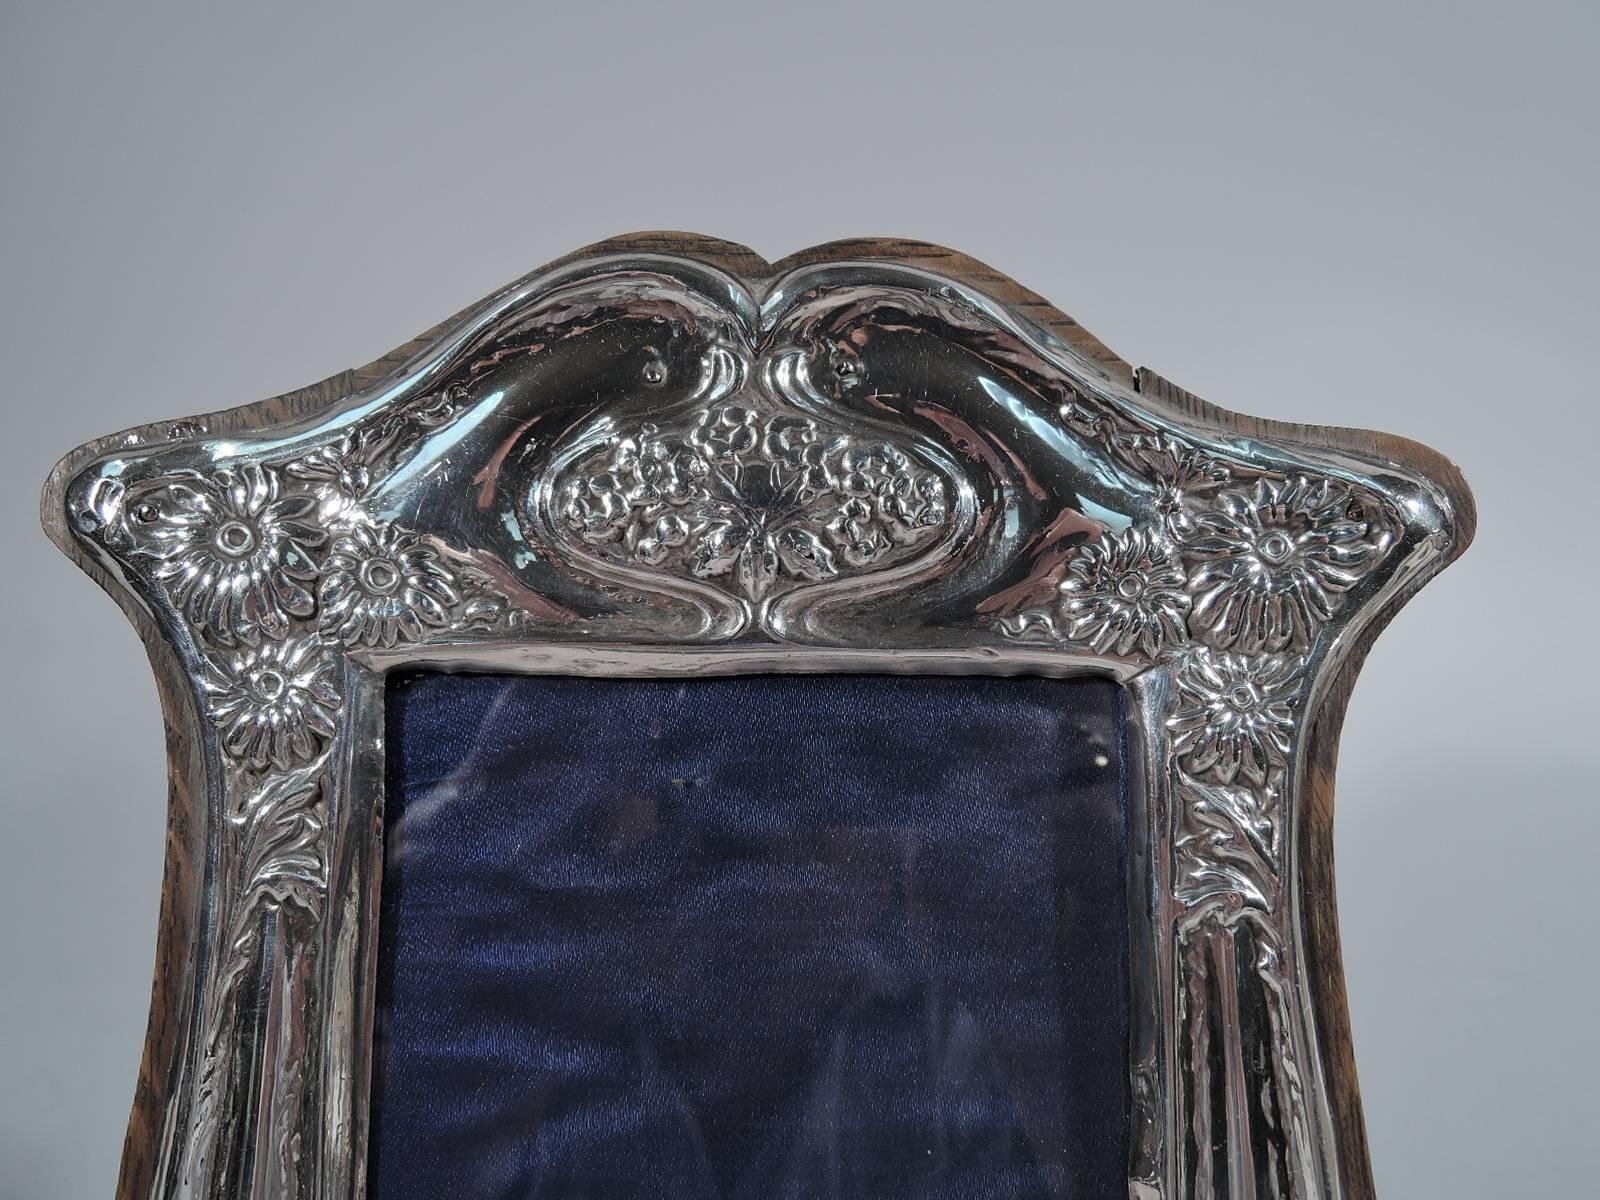 Art Nouveau sterling silver picture frame. Made by J. Aitkin & Son in Birmingham in 1909. Bombe sides, bracket feet, and shaped top. Symmetrical whiplash lines with flowers. Frame mounted to stained-wood with hinged support. Rectangular window with